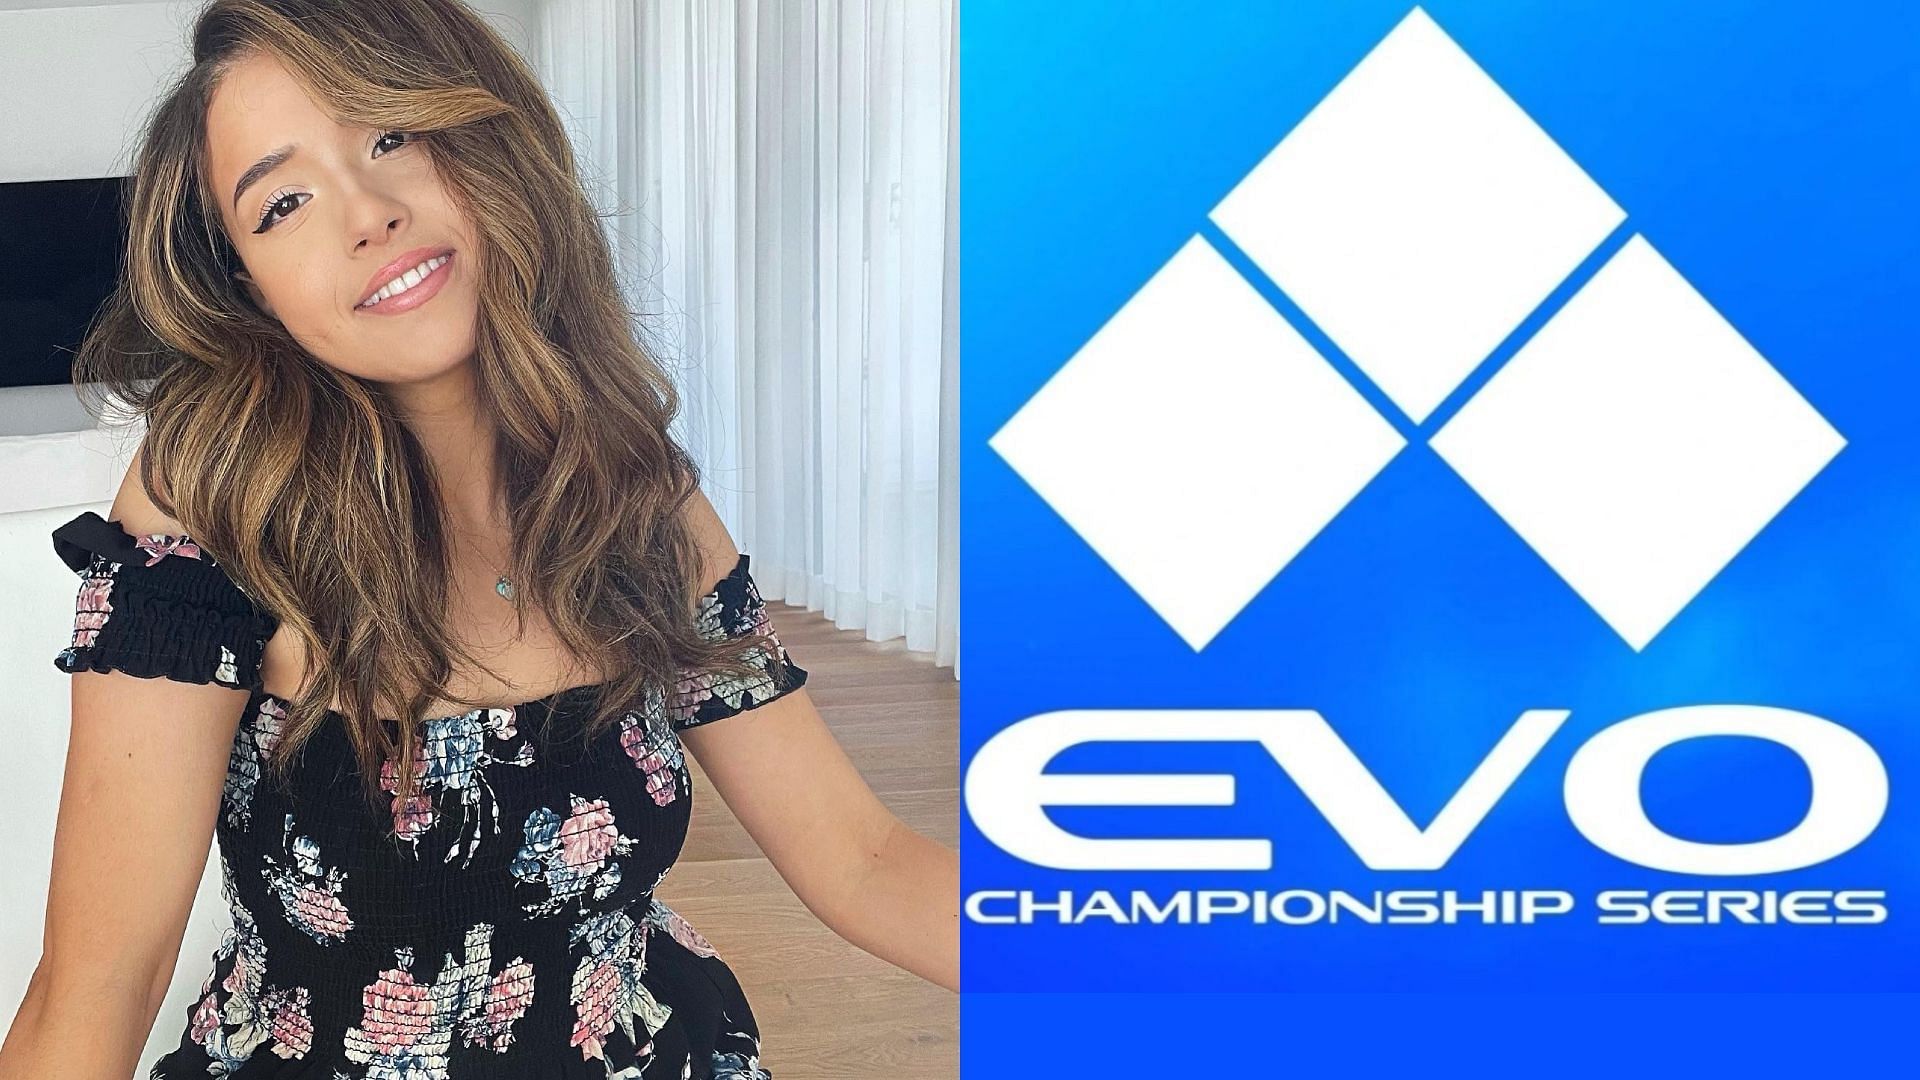 Twitch streamer Pokimane now co-owns Evo, an iconic fighting game tournament